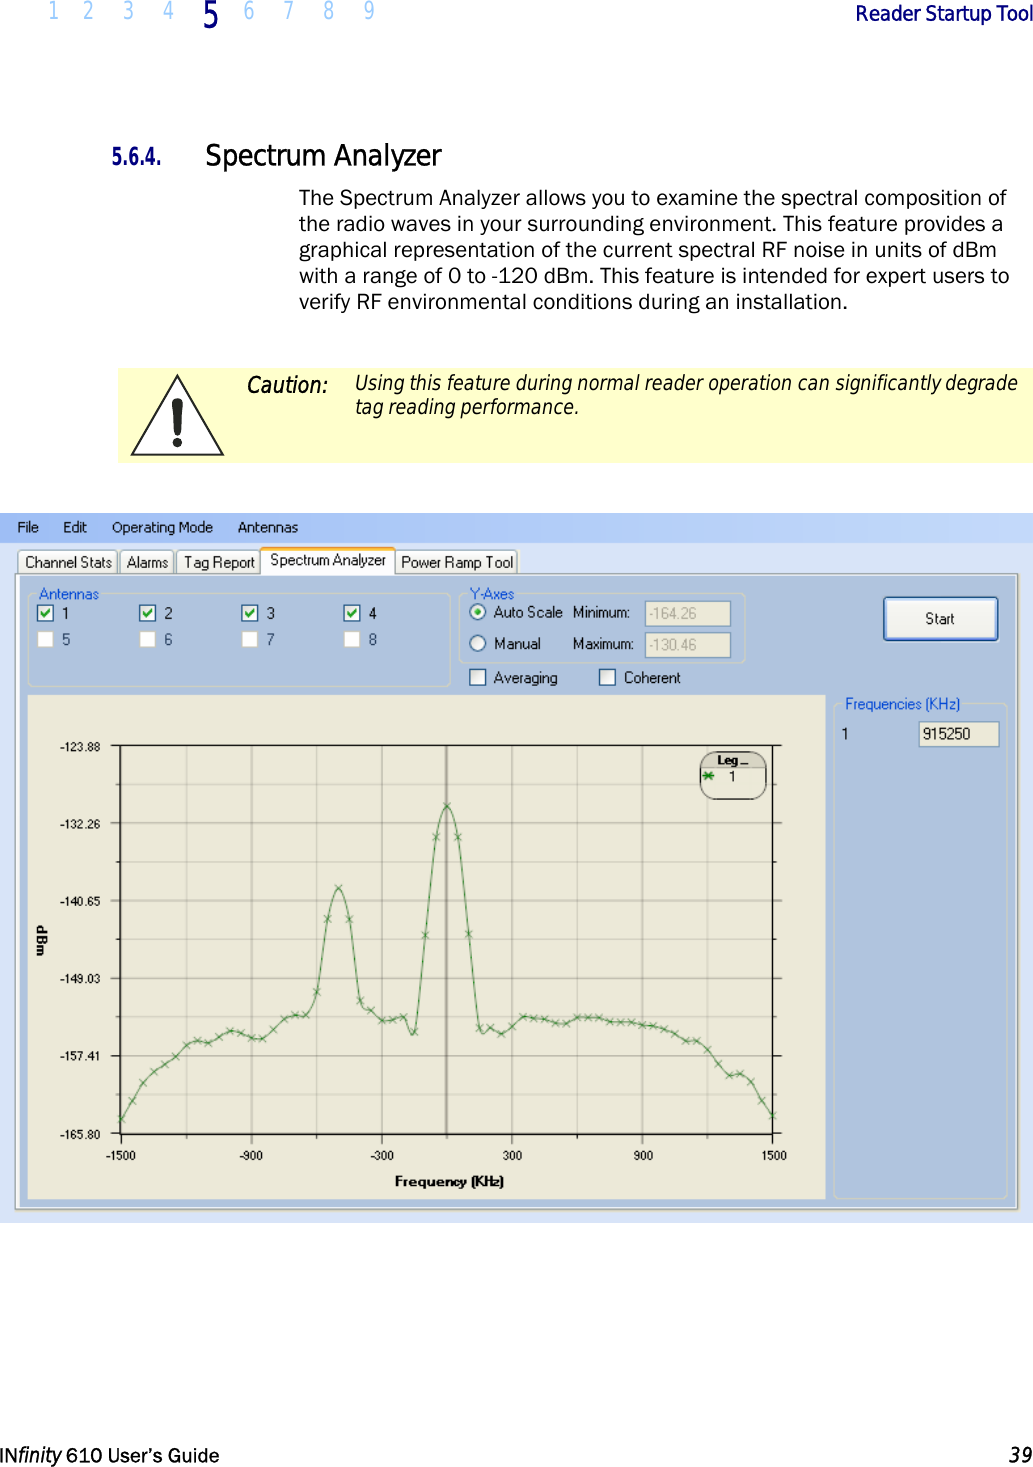  1 2 3 4 5  6 7 8 9        Reader Startup Tool   INfinity 610 User’s Guide  39  5.6.4. Spectrum Analyzer The Spectrum Analyzer allows you to examine the spectral composition of the radio waves in your surrounding environment. This feature provides a graphical representation of the current spectral RF noise in units of dBm with a range of 0 to -120 dBm. This feature is intended for expert users to verify RF environmental conditions during an installation.    Caution:  Using this feature during normal reader operation can significantly degrade tag reading performance.       